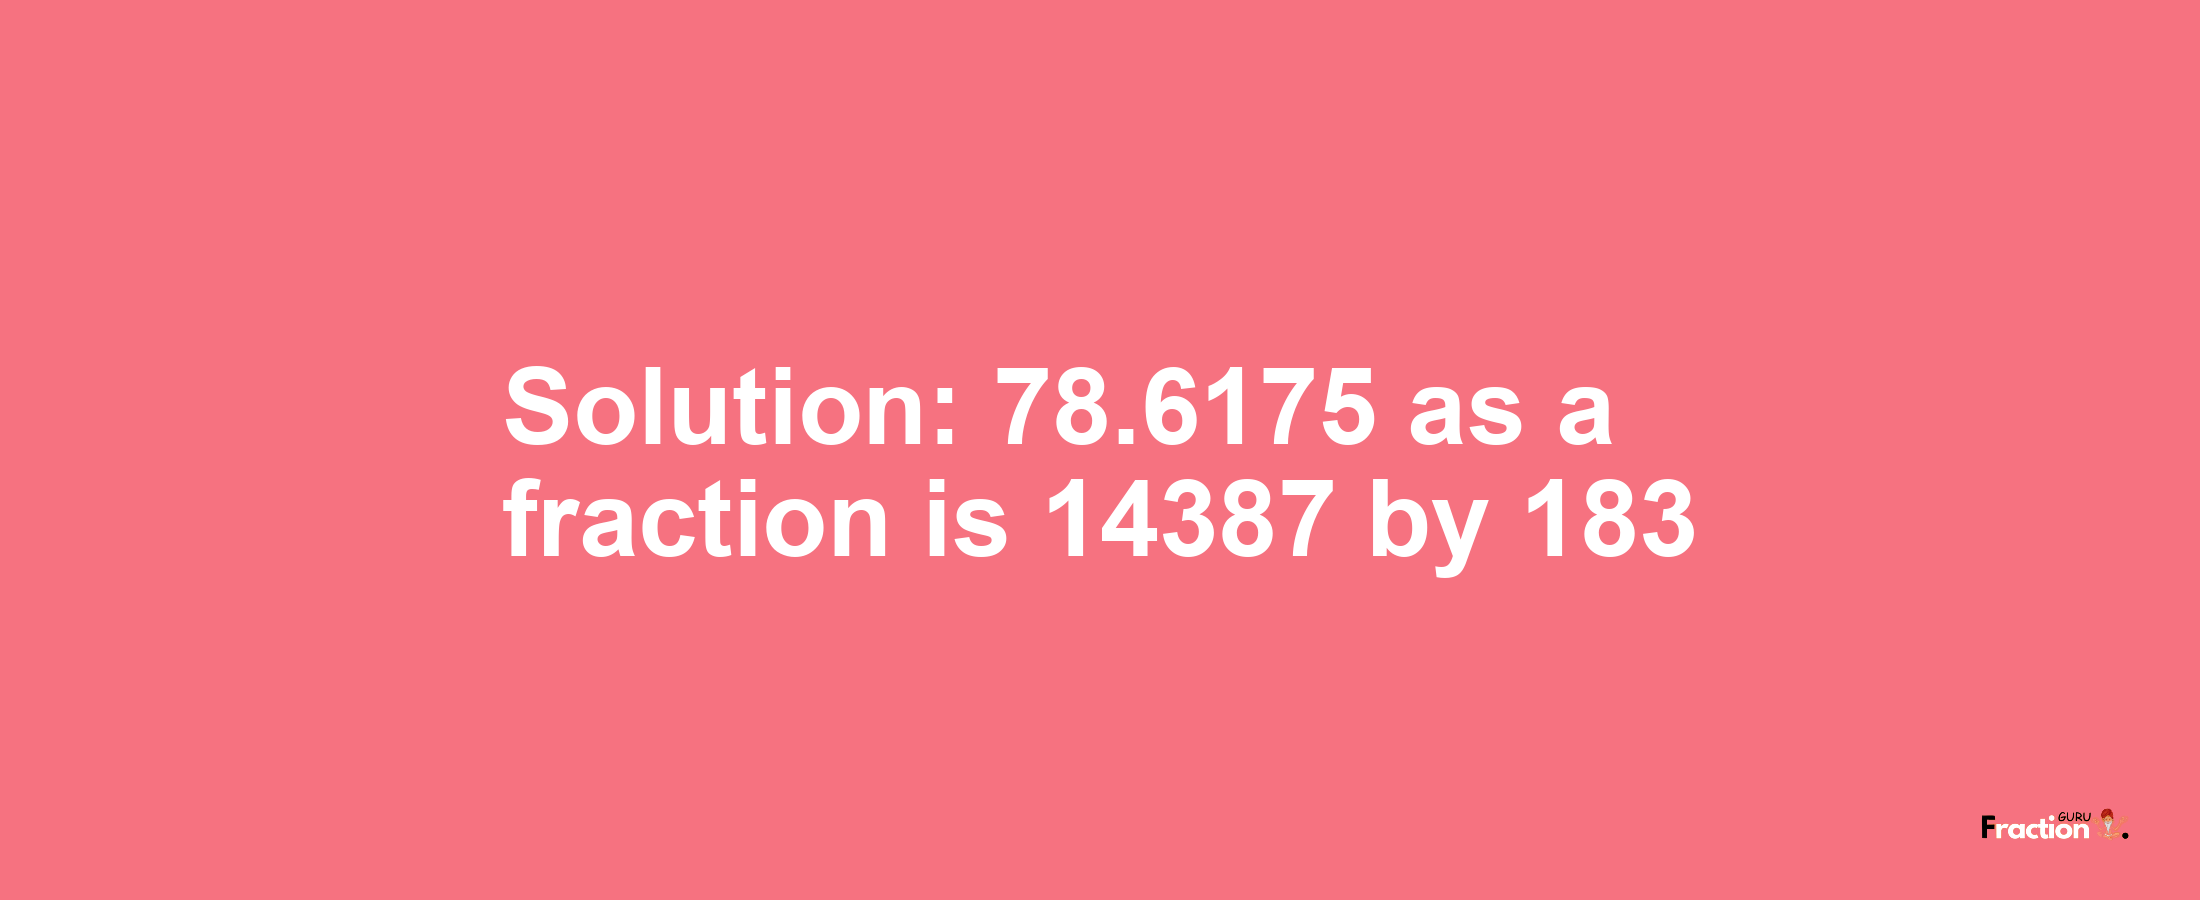 Solution:78.6175 as a fraction is 14387/183